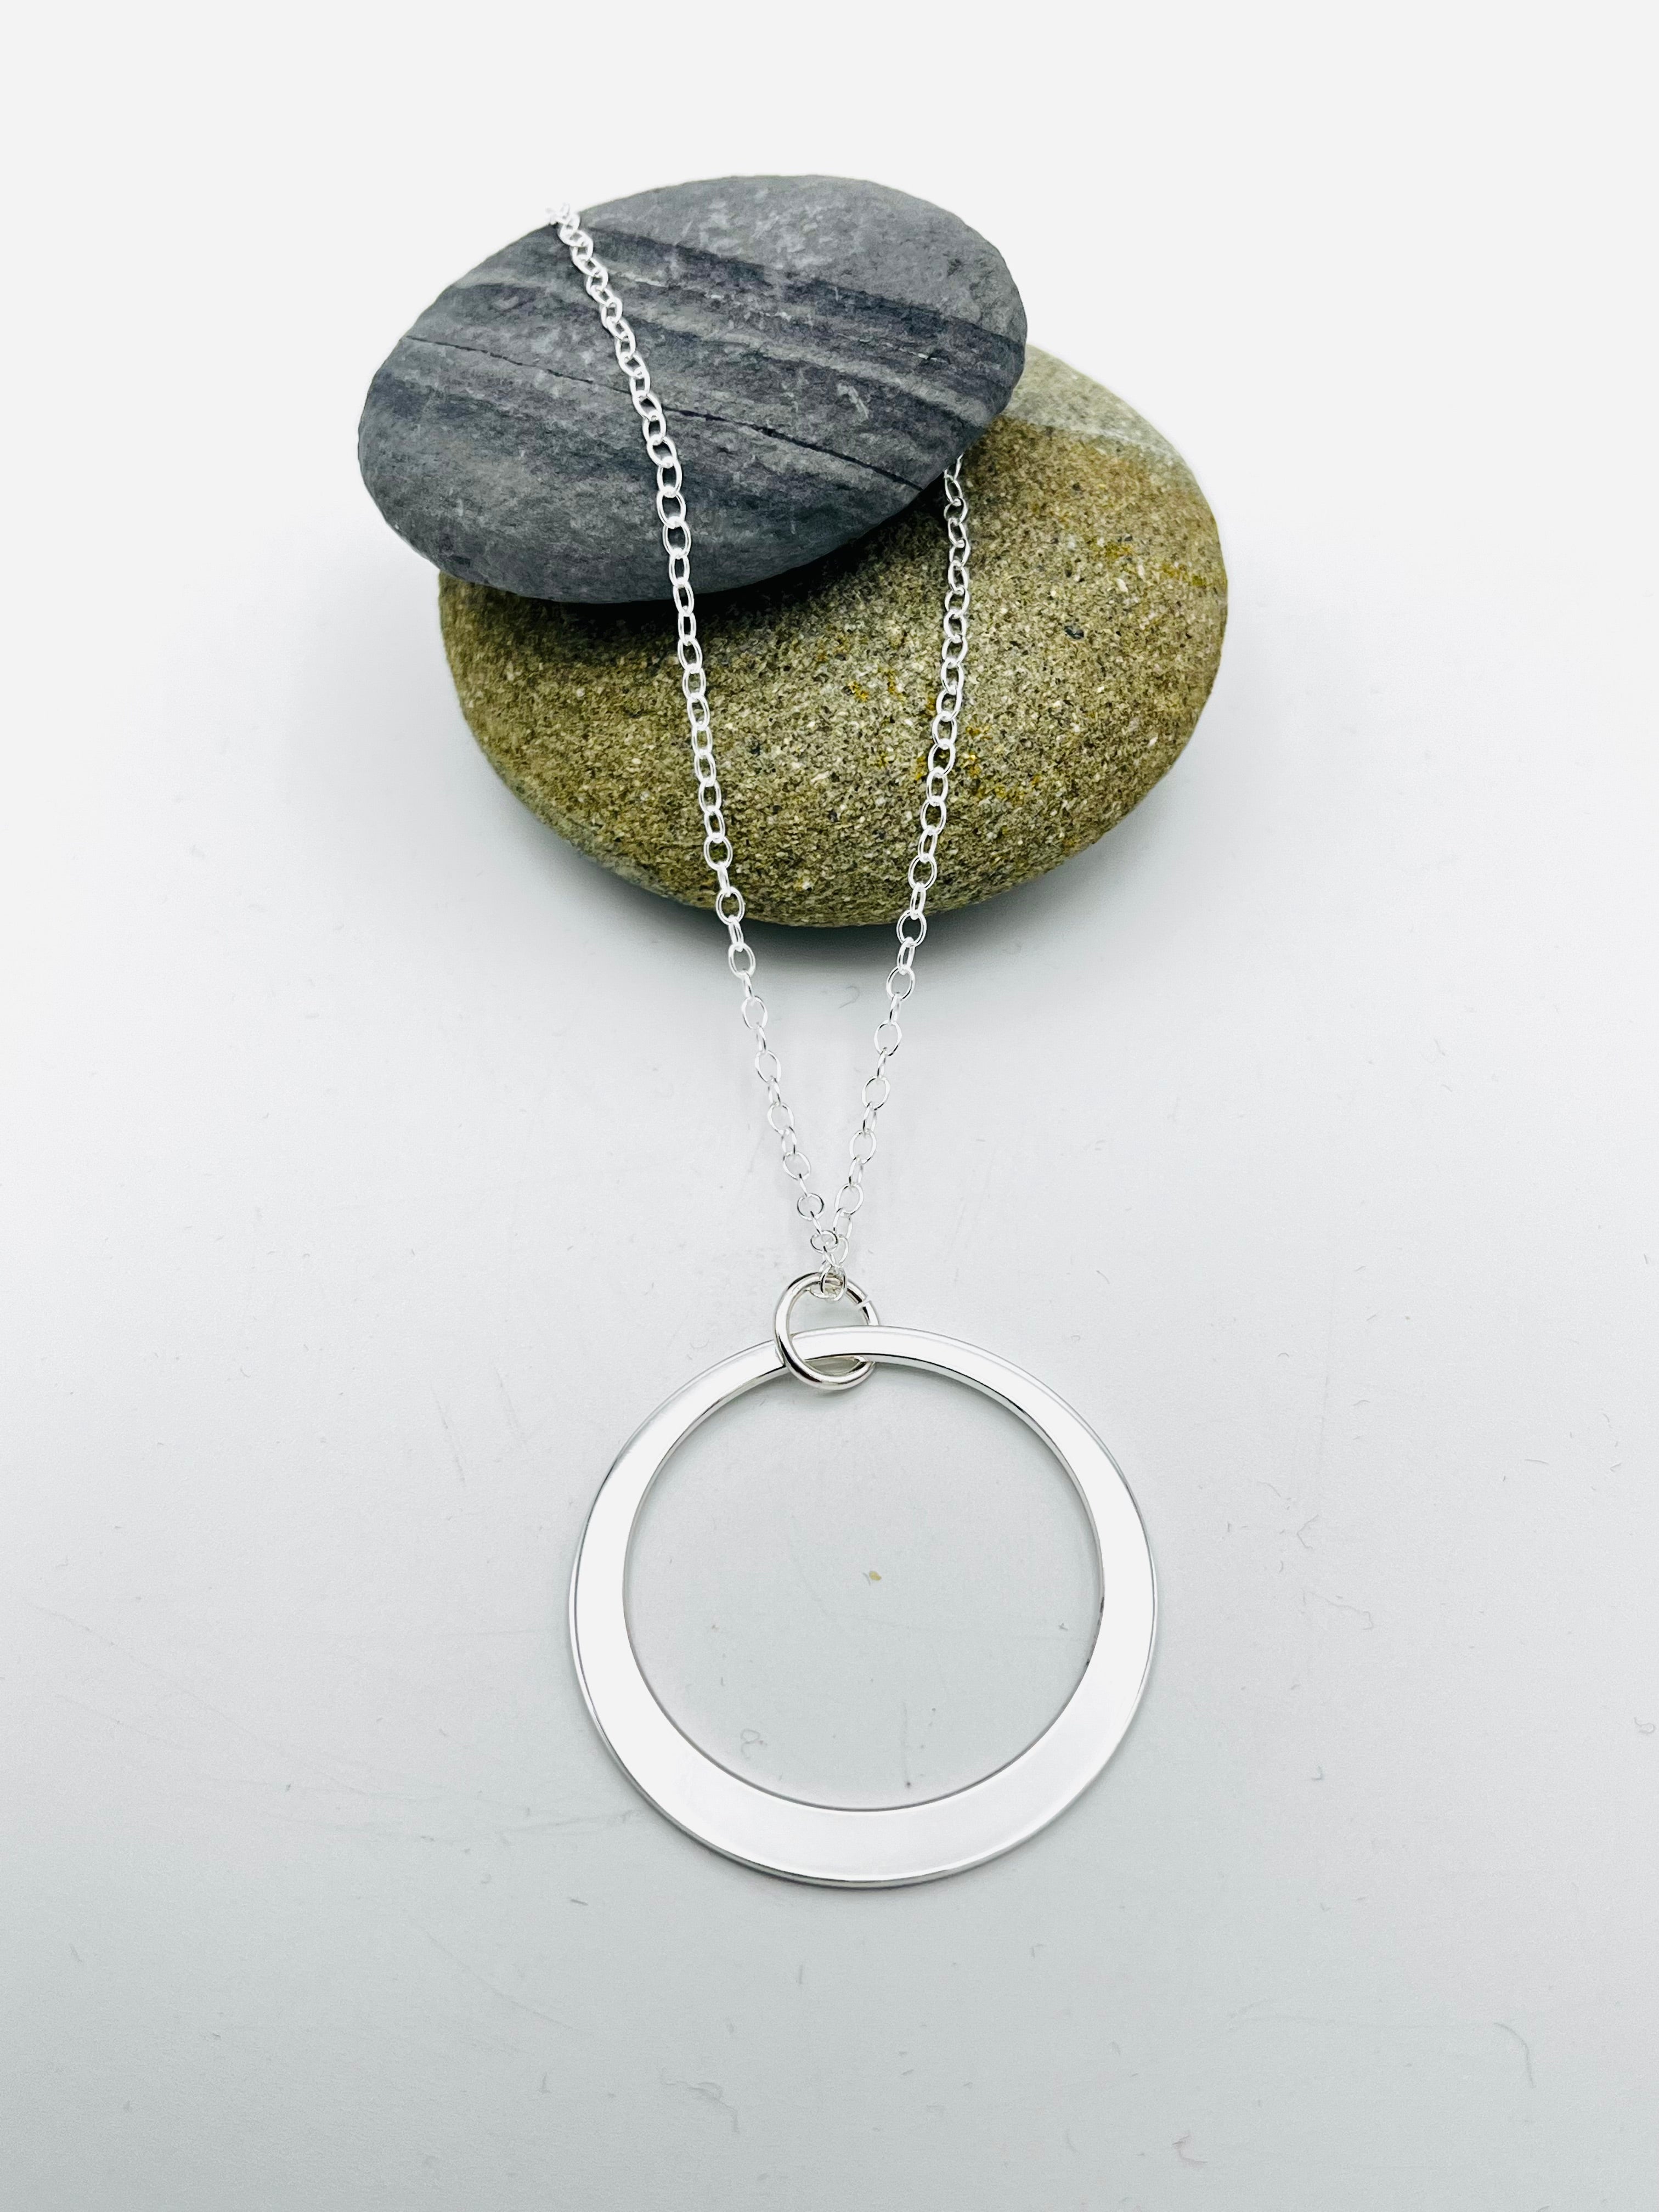 Sterling Silver Pendant. Single offset ring pendant 32mm wide polished finish